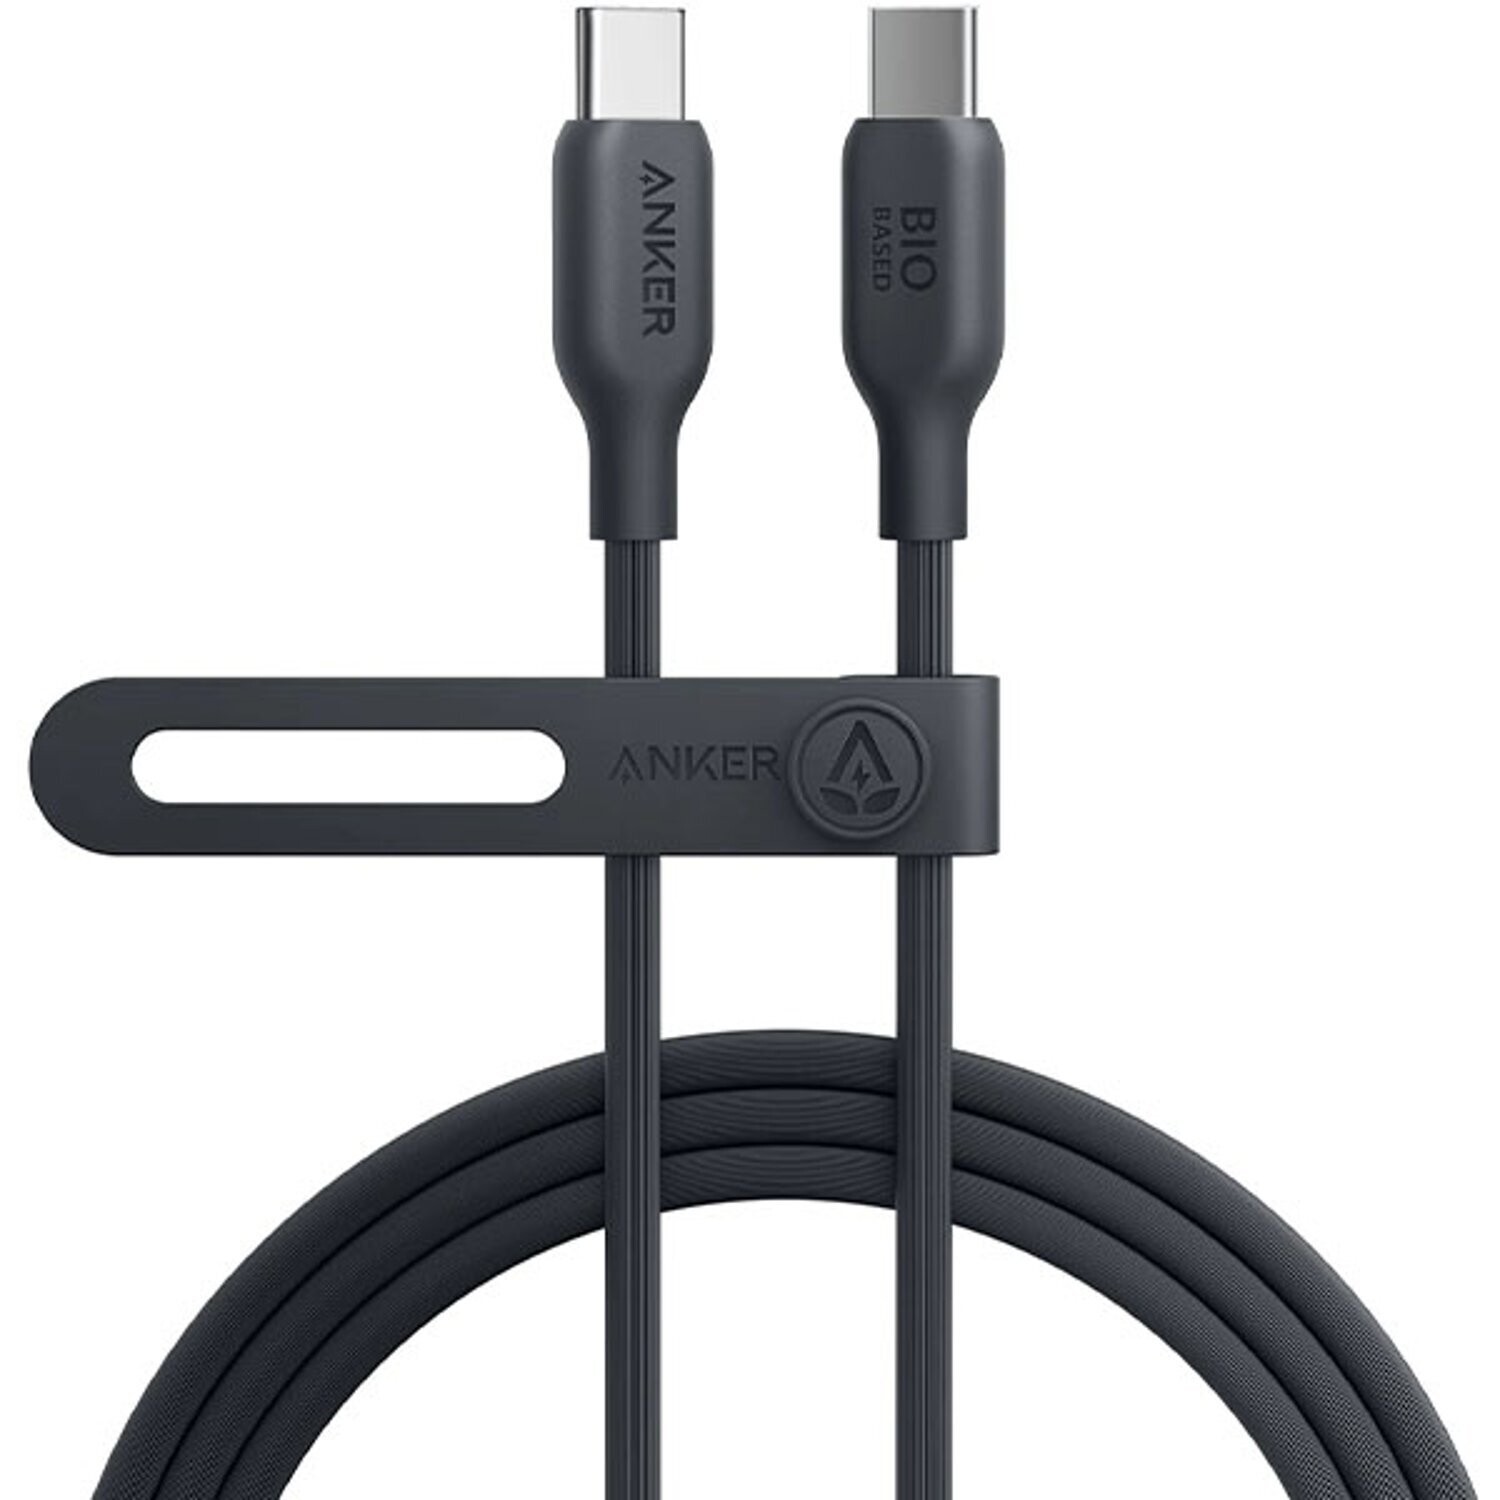 Anker 544 Bio Based 6ft 1.8Mtr USB-C to USB-C Cable Black